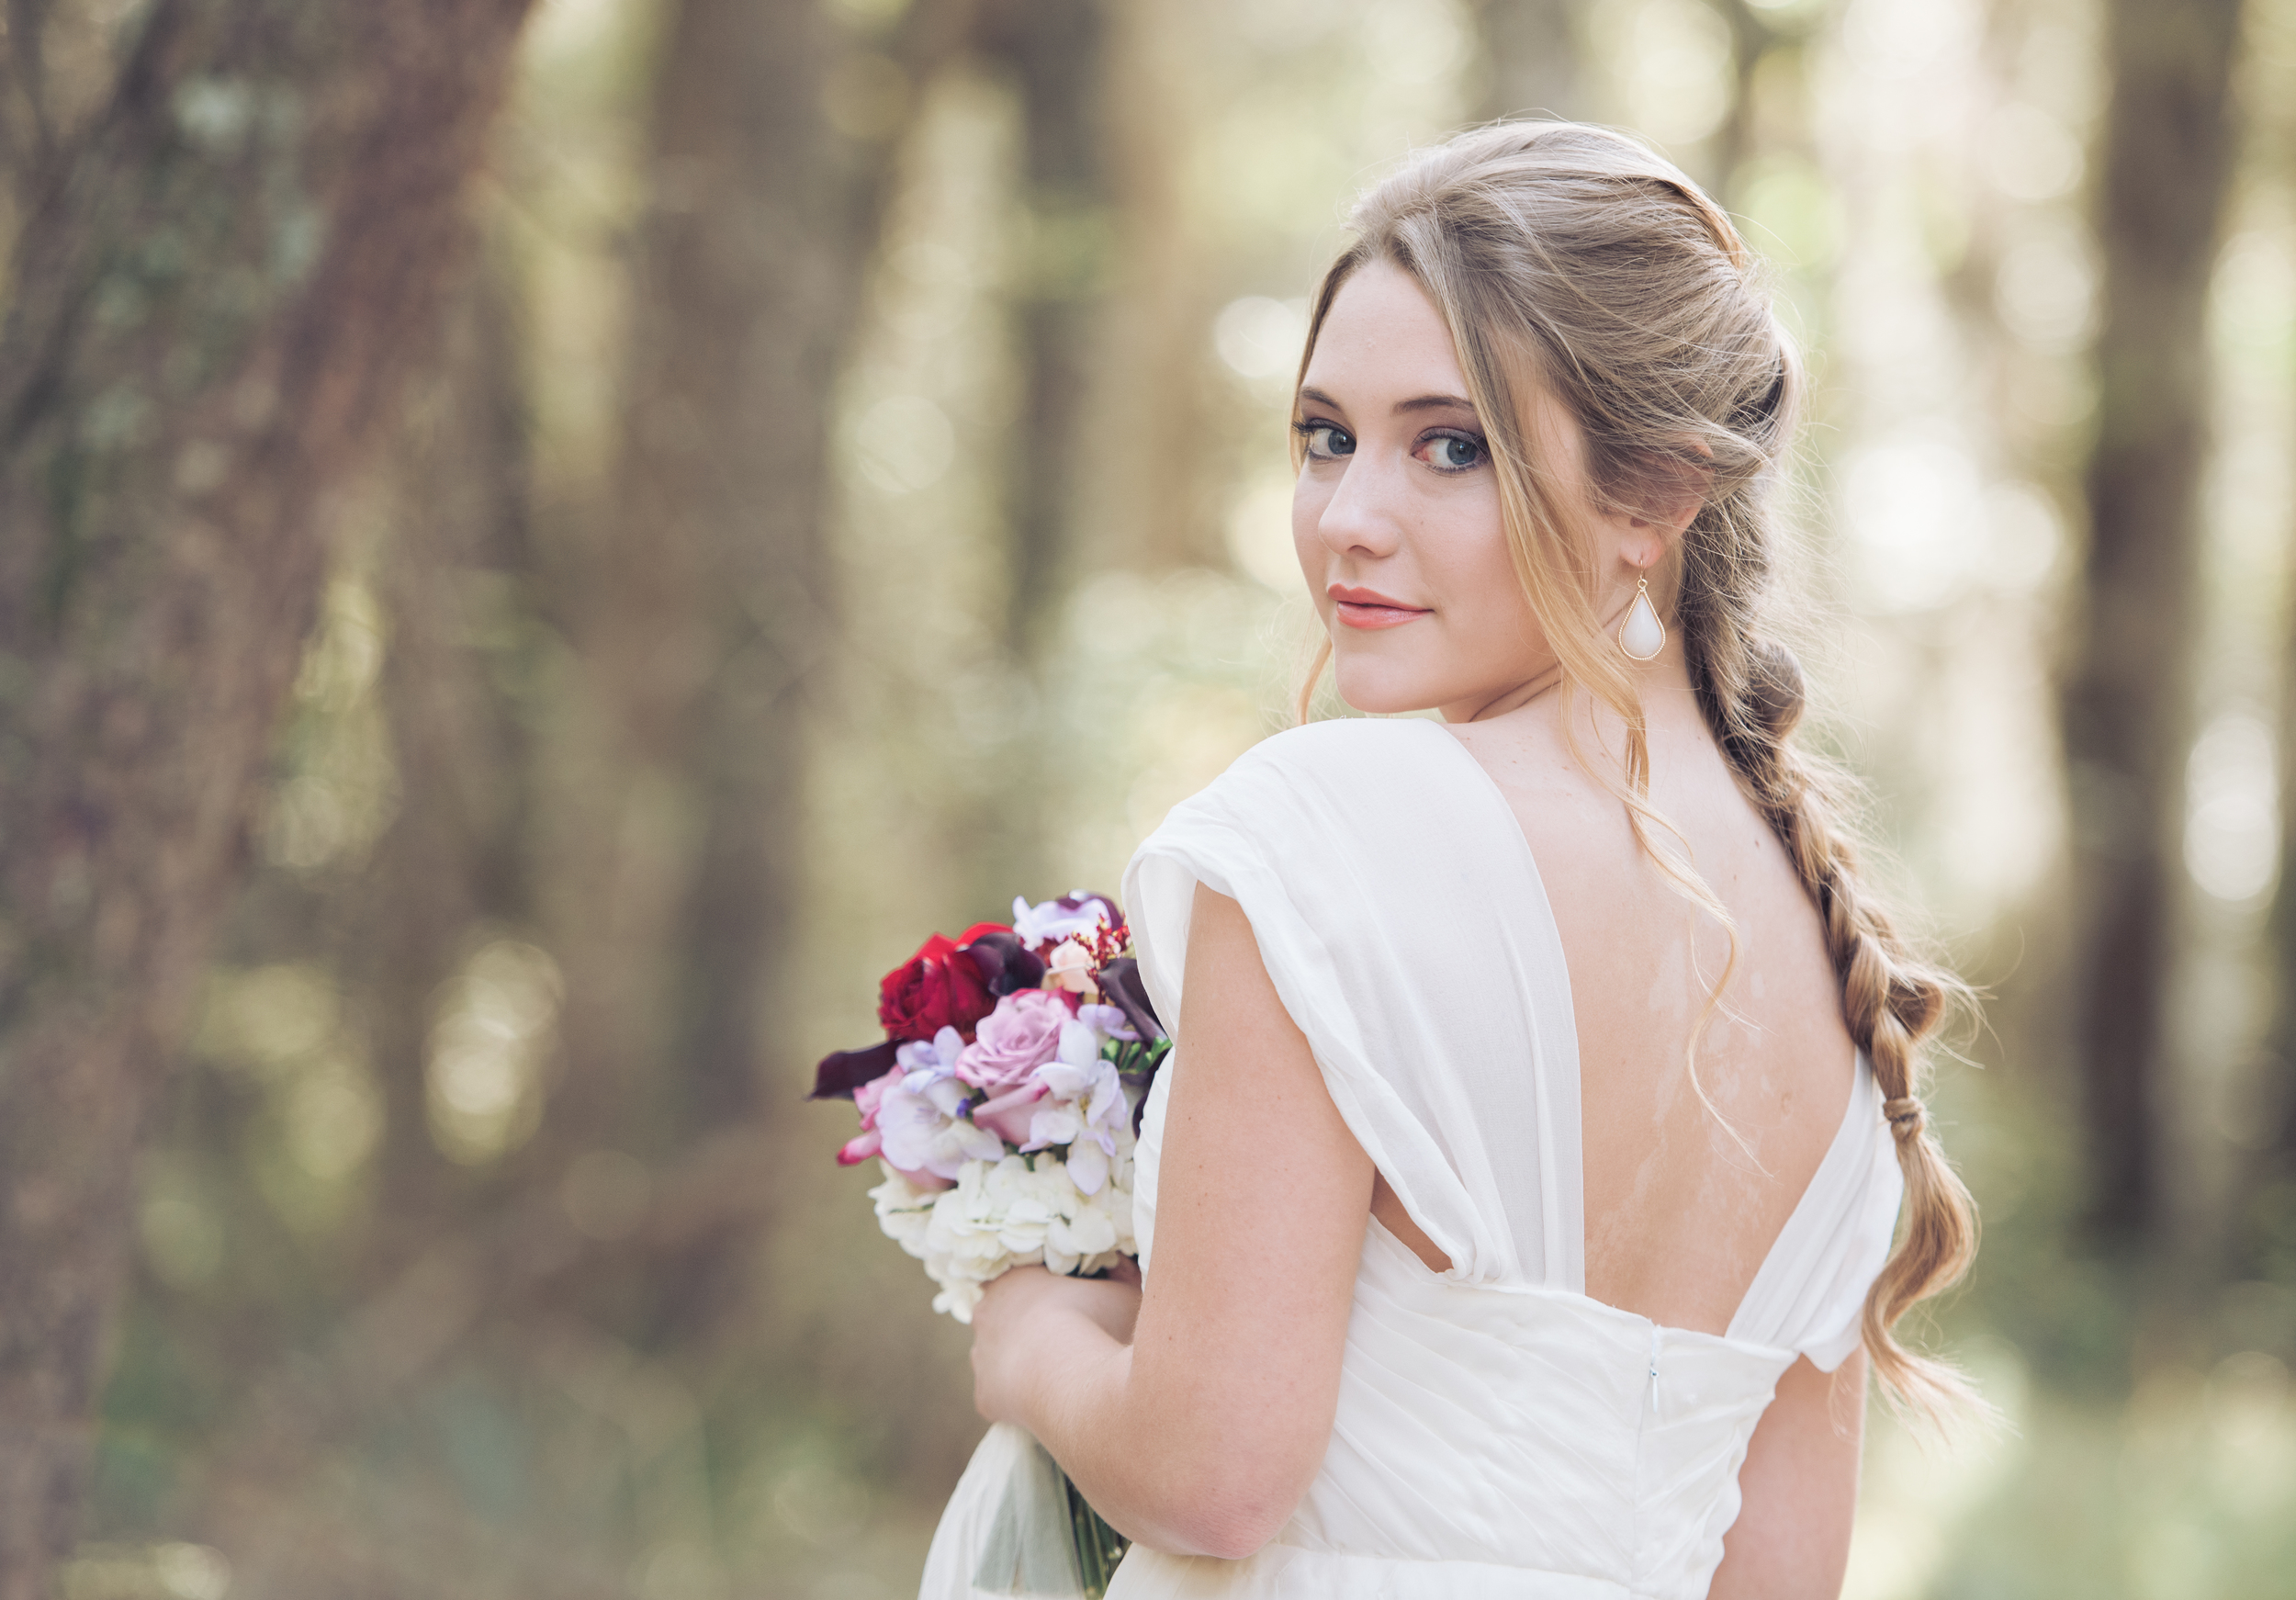 5-D-Photography-lafayette-sarah-seven-off-the-shoulder-wedding-dress-Gardenias-hilton-head- Ogeechee-Canal-Trail-ivory-and-beau-bridal-boutique-savannah-wedding-dresses-savannah-bridal-boutique-savannah-weddings-hilton-head-bridal-2.jpg